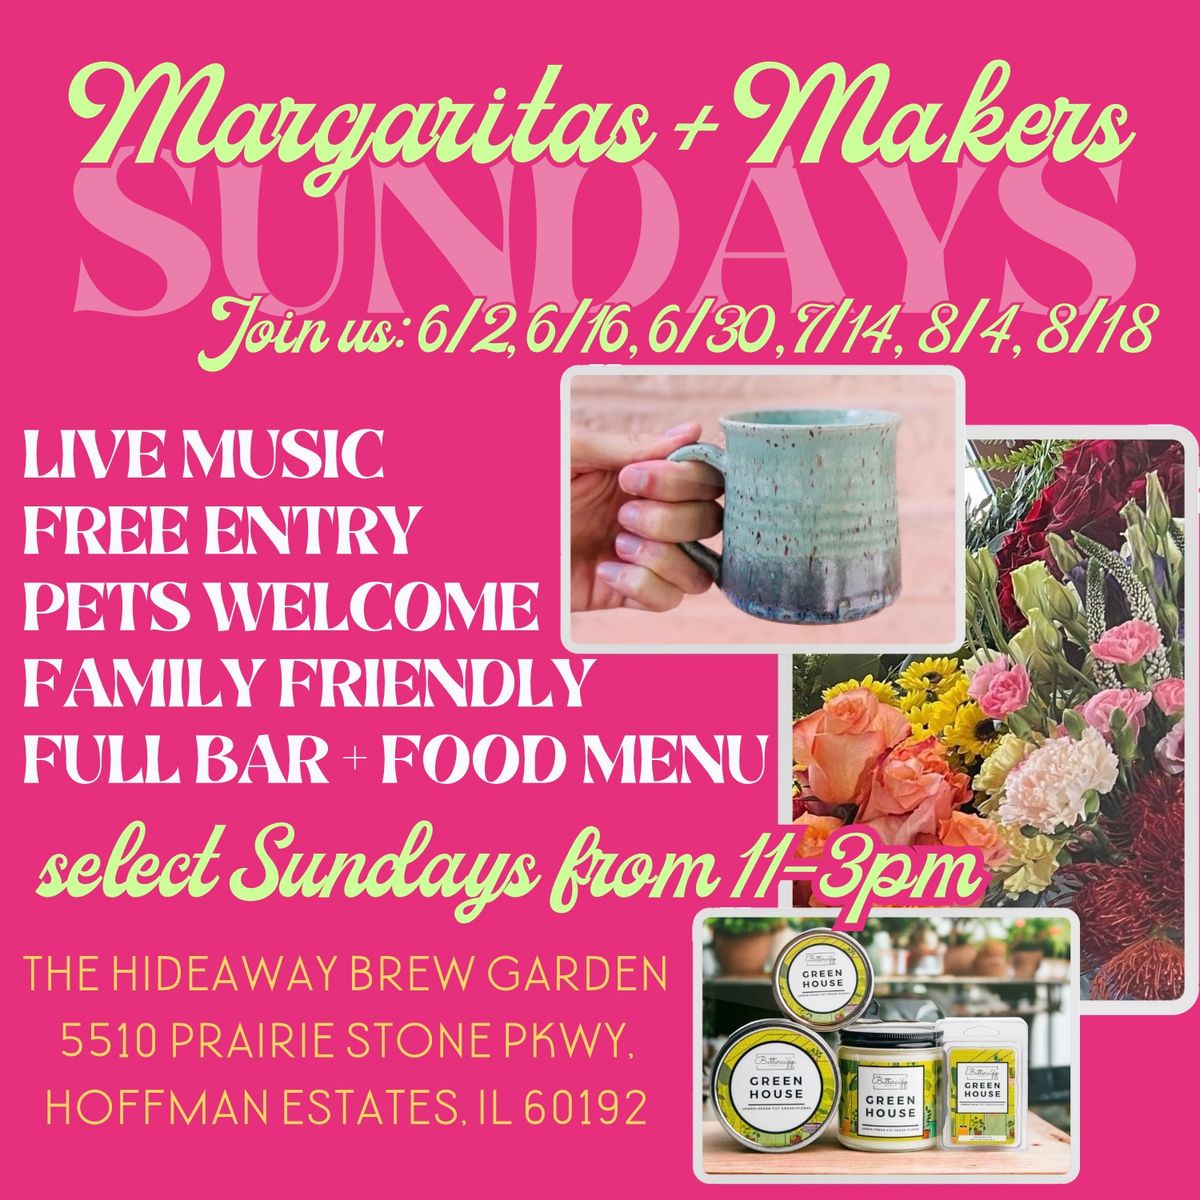 Margaritas & Makers featuring Cheap Foreign Cars Live